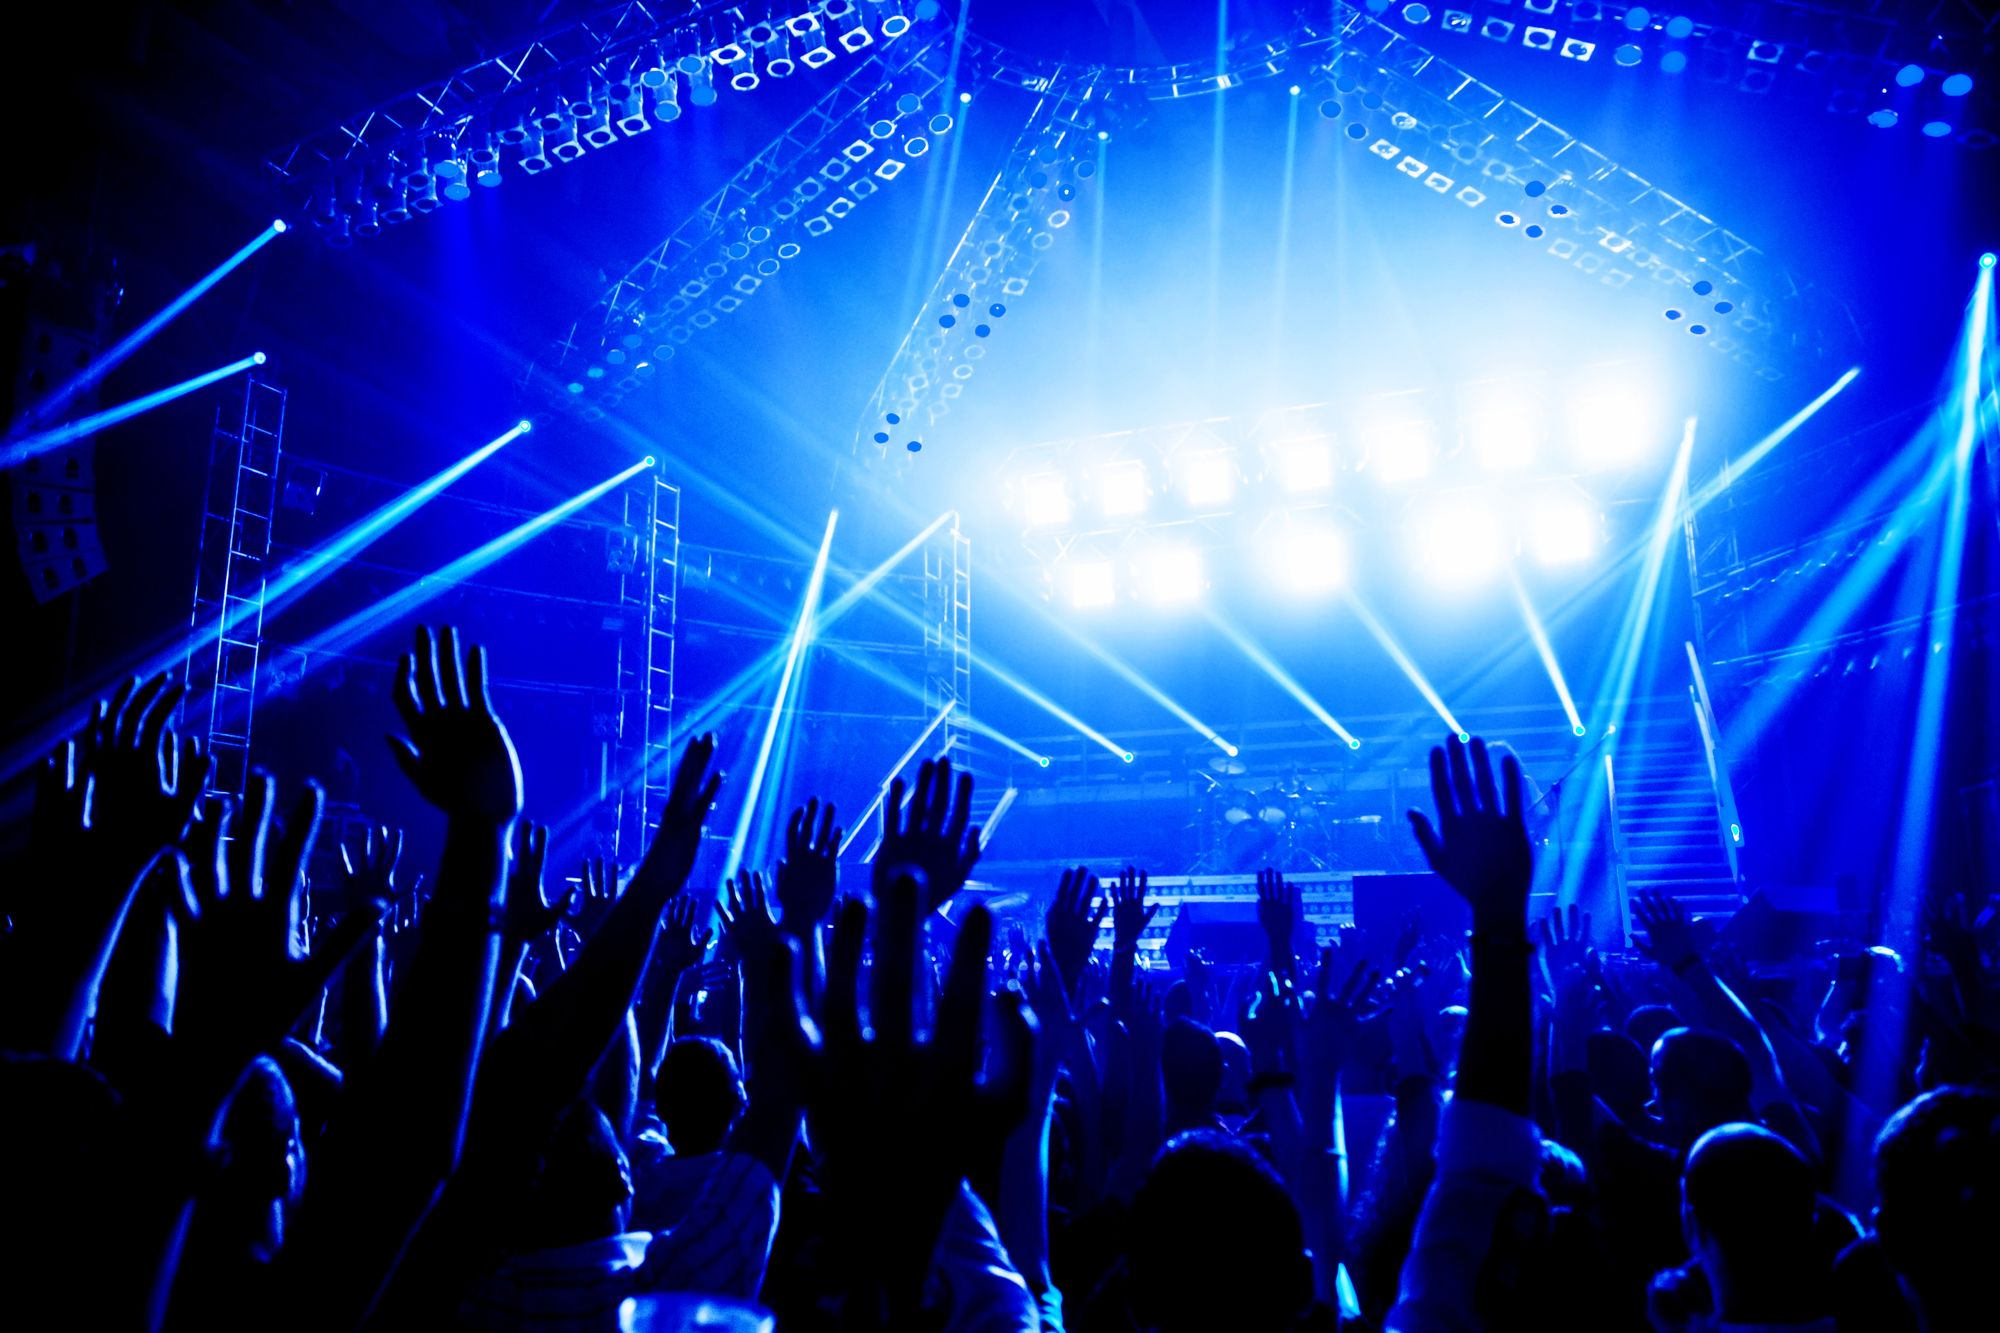 Rock concert, crowd of young people enjoying night performance, raised up and clapping hands, dance club, bright blue lights, music entertainment